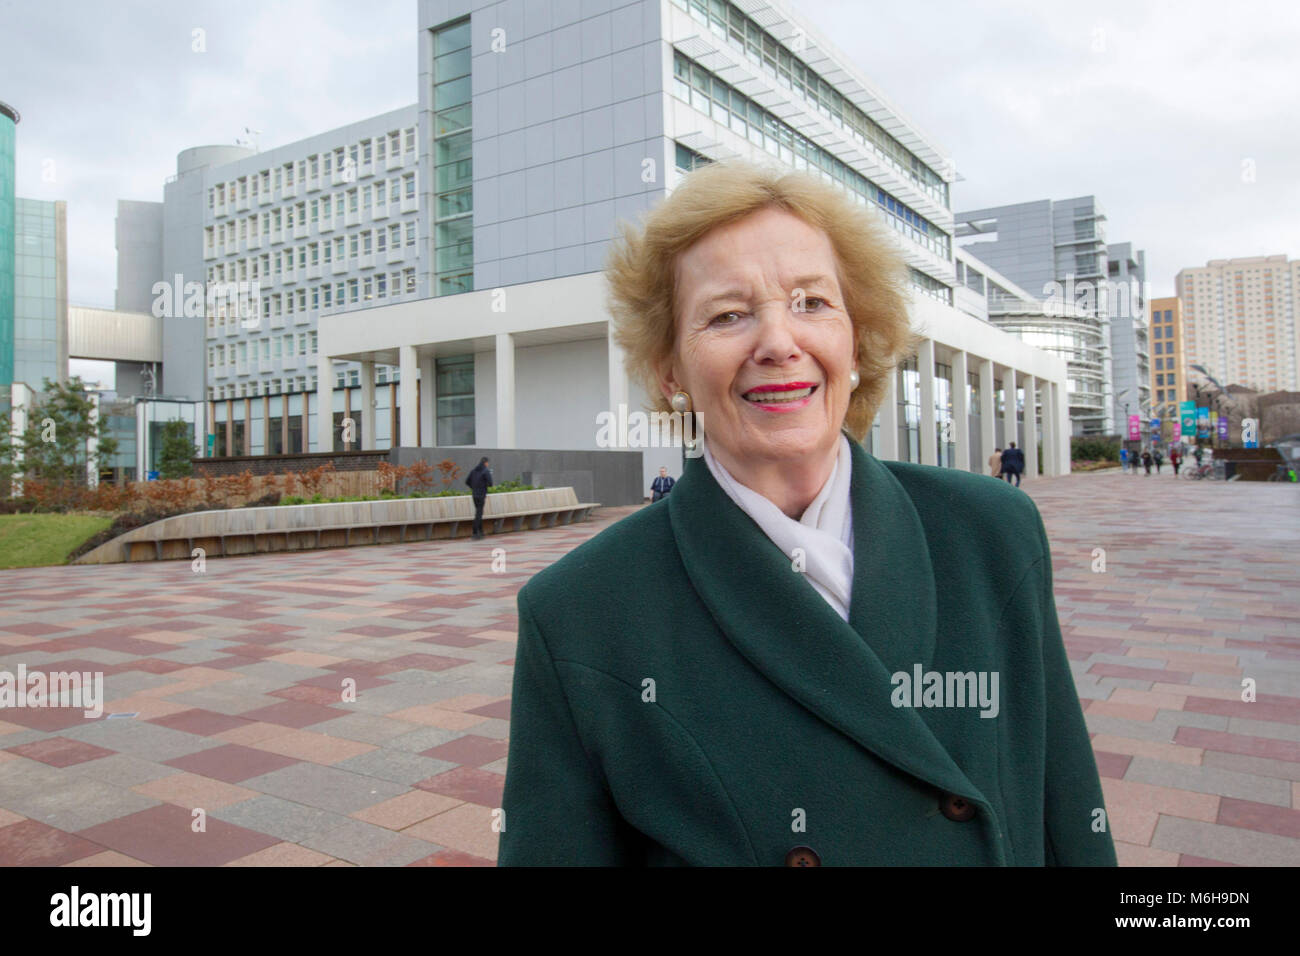 Mary Robinson lecturing at University Stock Photo